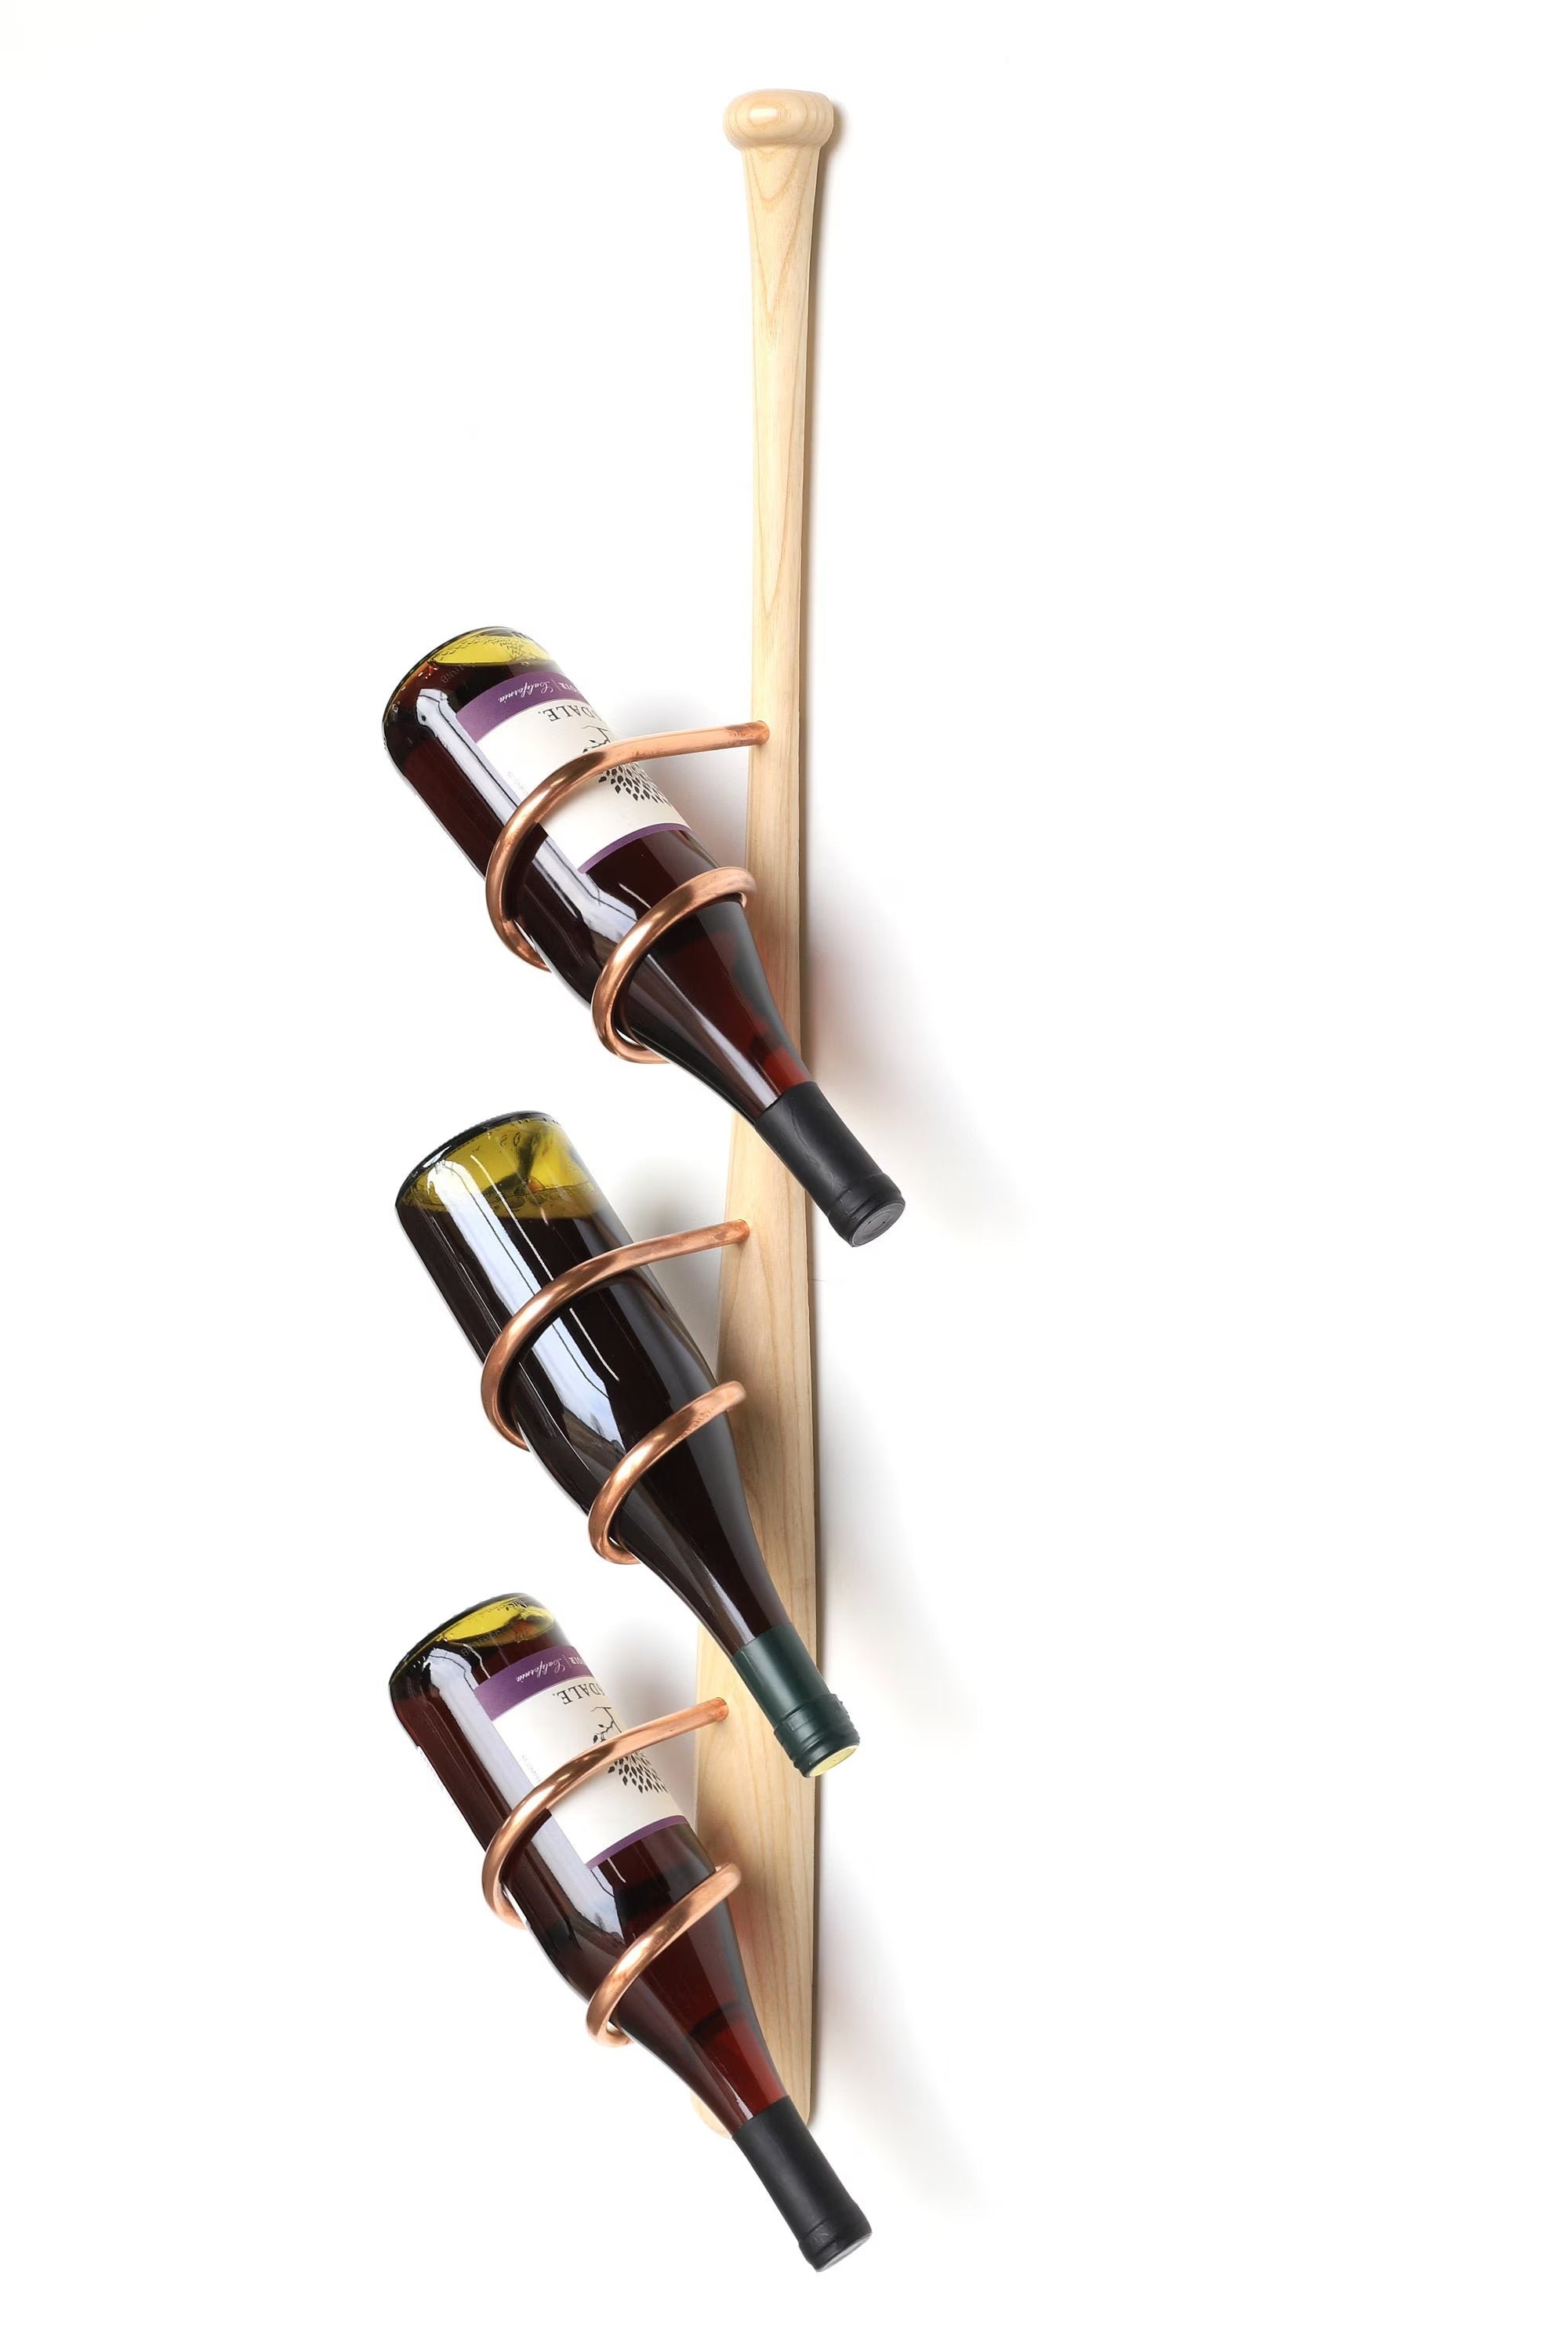 Store your wine collection uniquely with a baseball bat wine rack